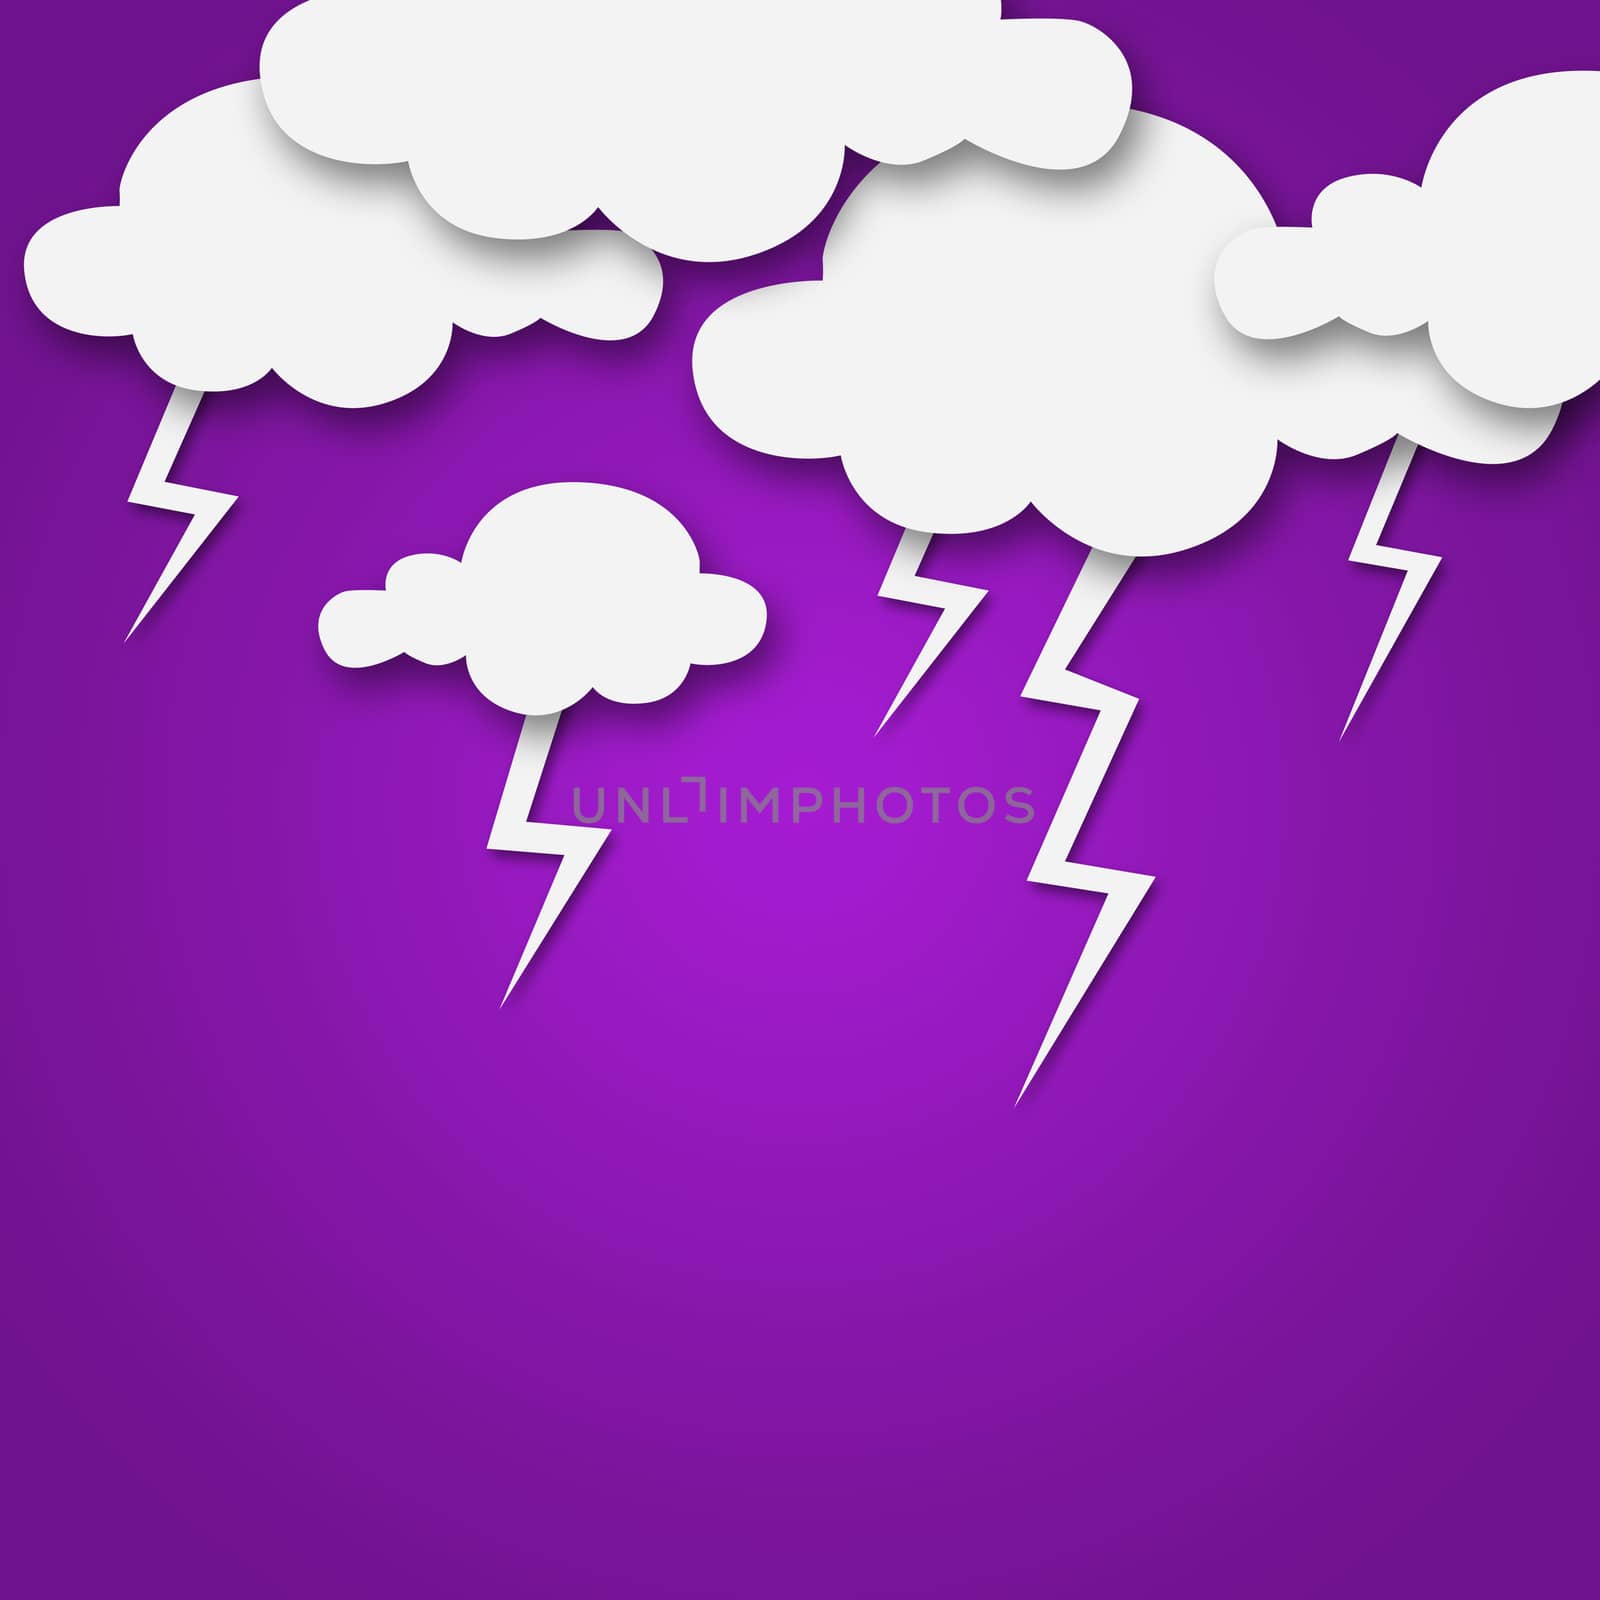 Set of various white clouds on purple background